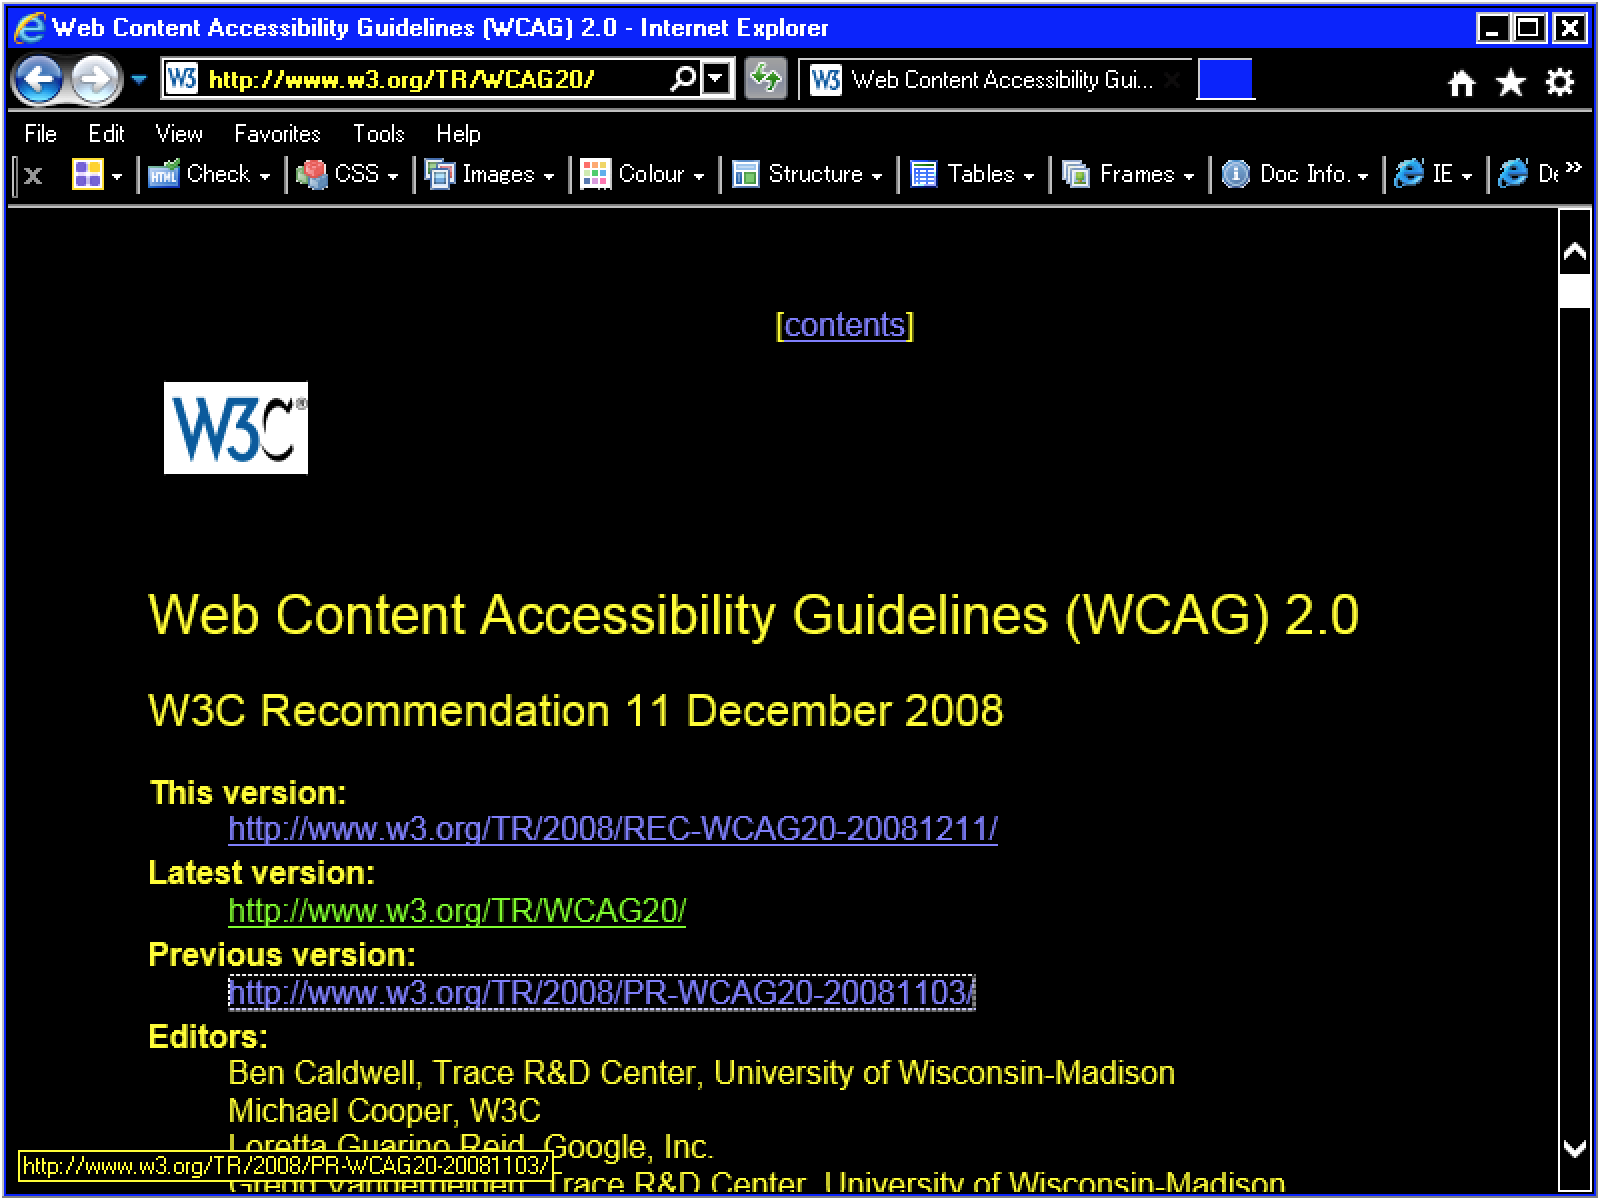 The WCAG 2.0 website in high contrast mode